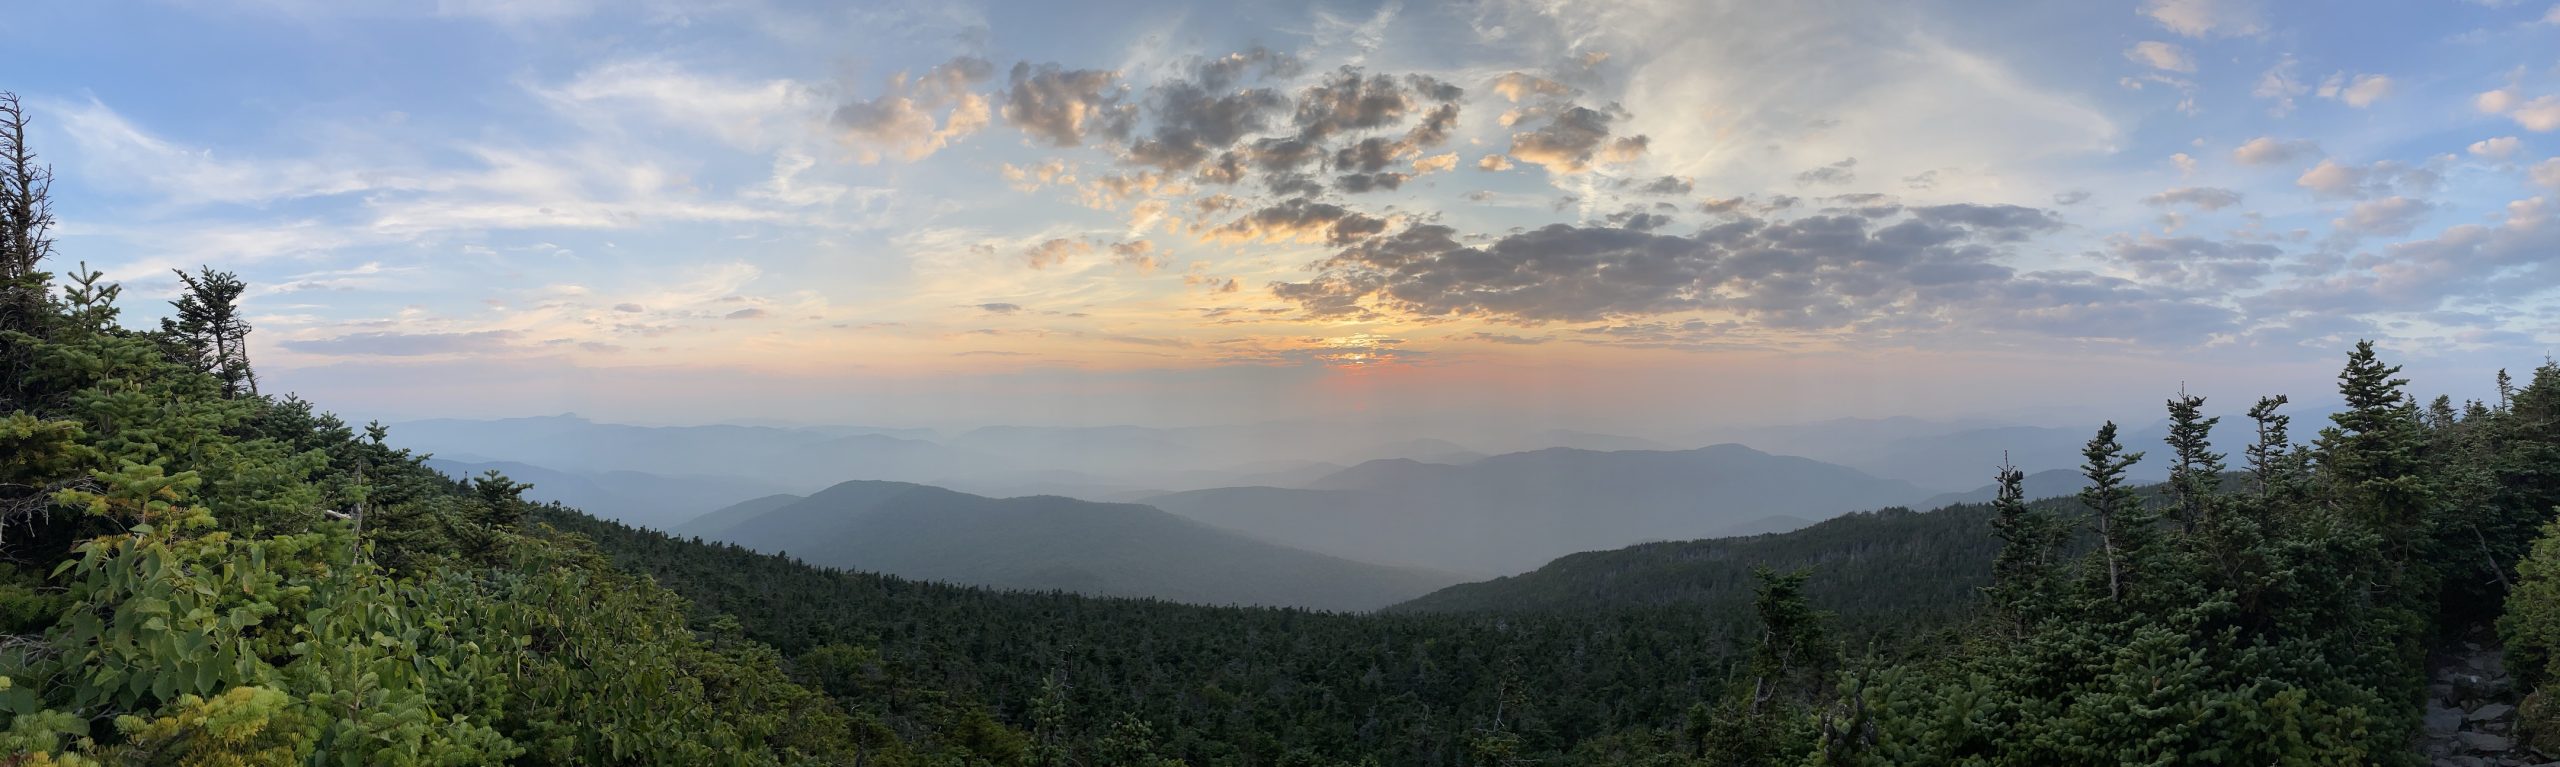 View of the sunset in the western Vermont sky, from the summit of Camel's Hump